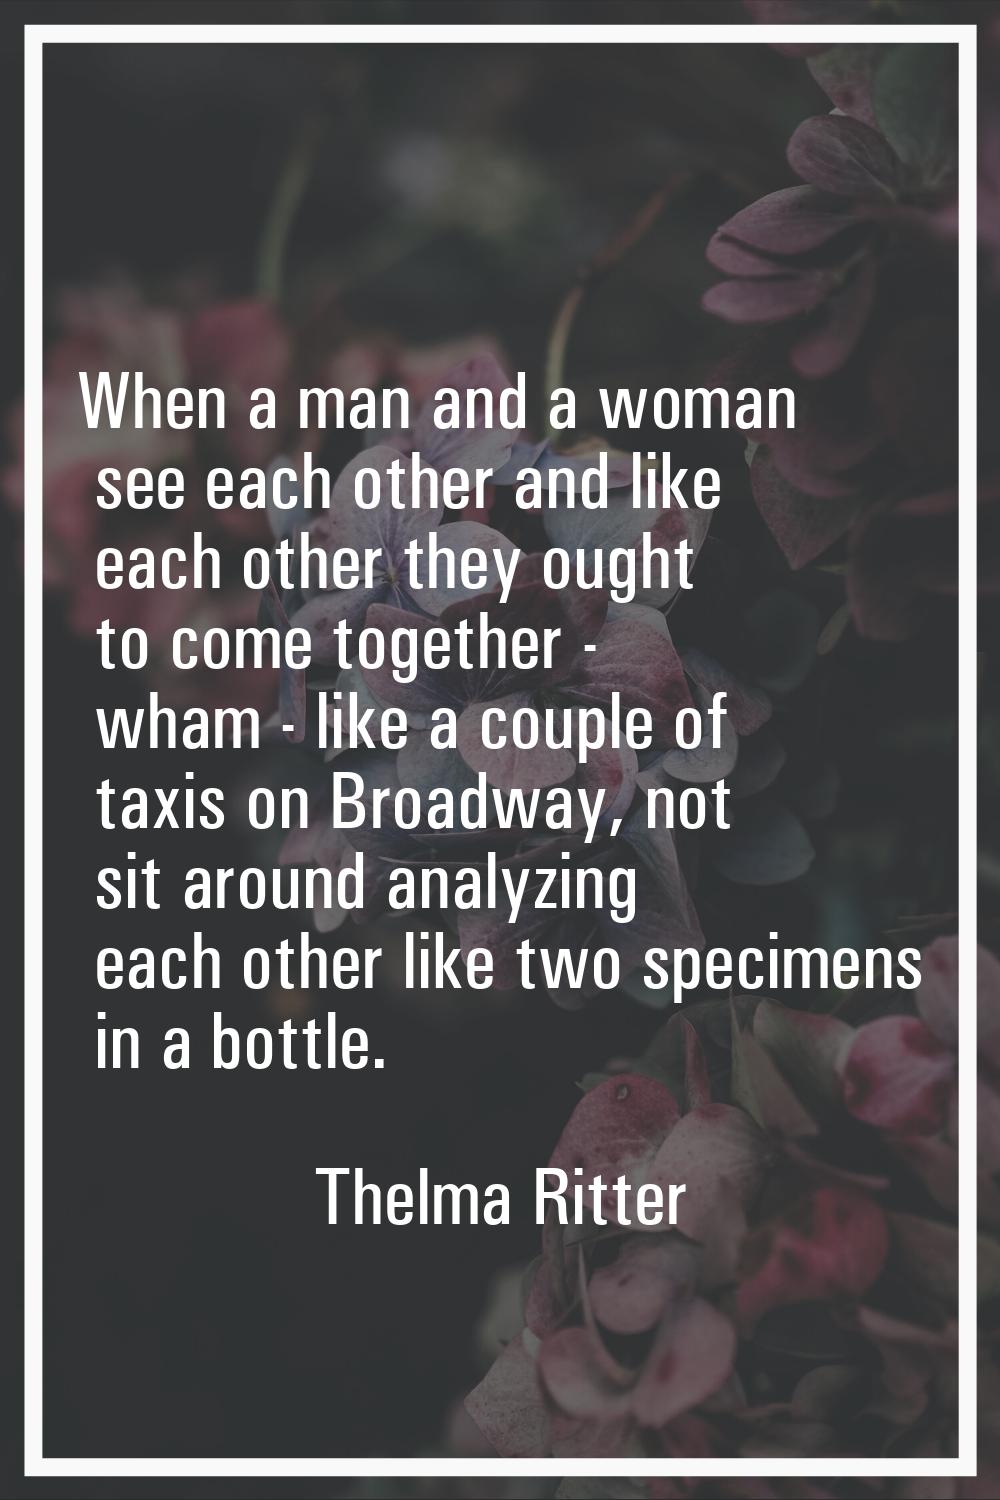 When a man and a woman see each other and like each other they ought to come together - wham - like